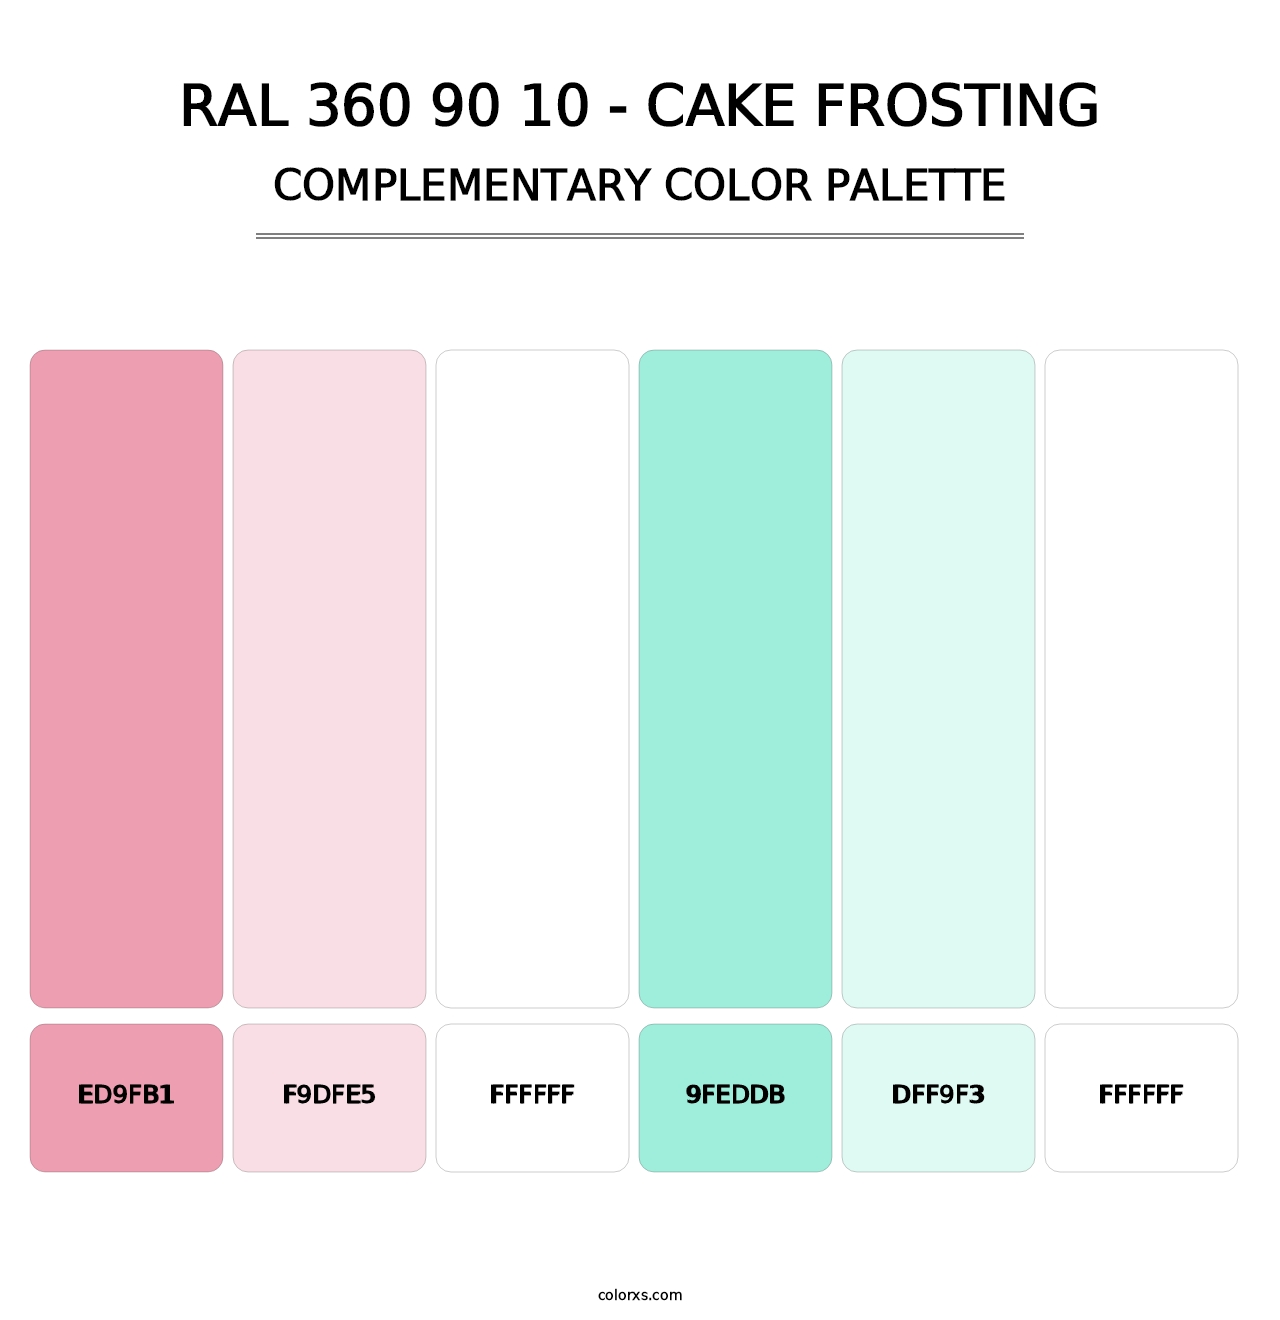 RAL 360 90 10 - Cake Frosting - Complementary Color Palette